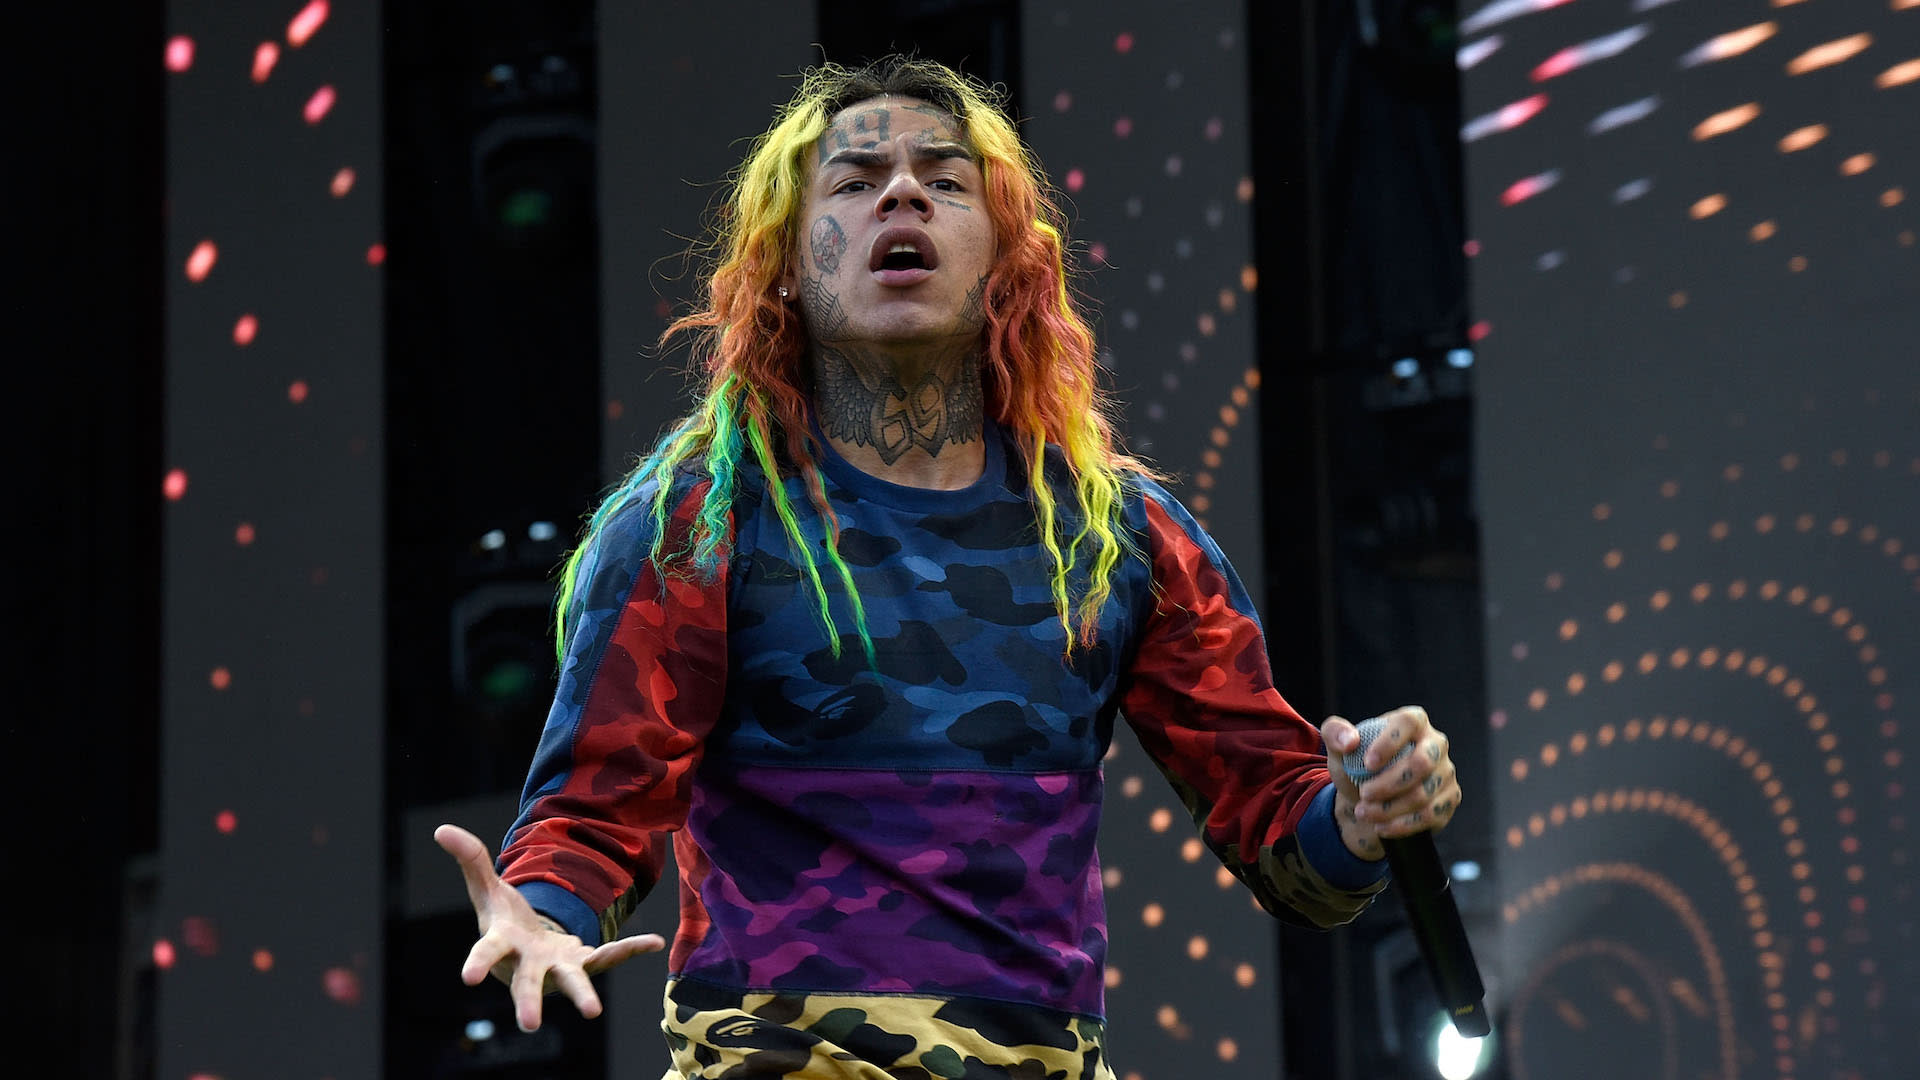 6ix9ine faces Miami Stripper lawsuit for allegedly hitting her with champagne bottle